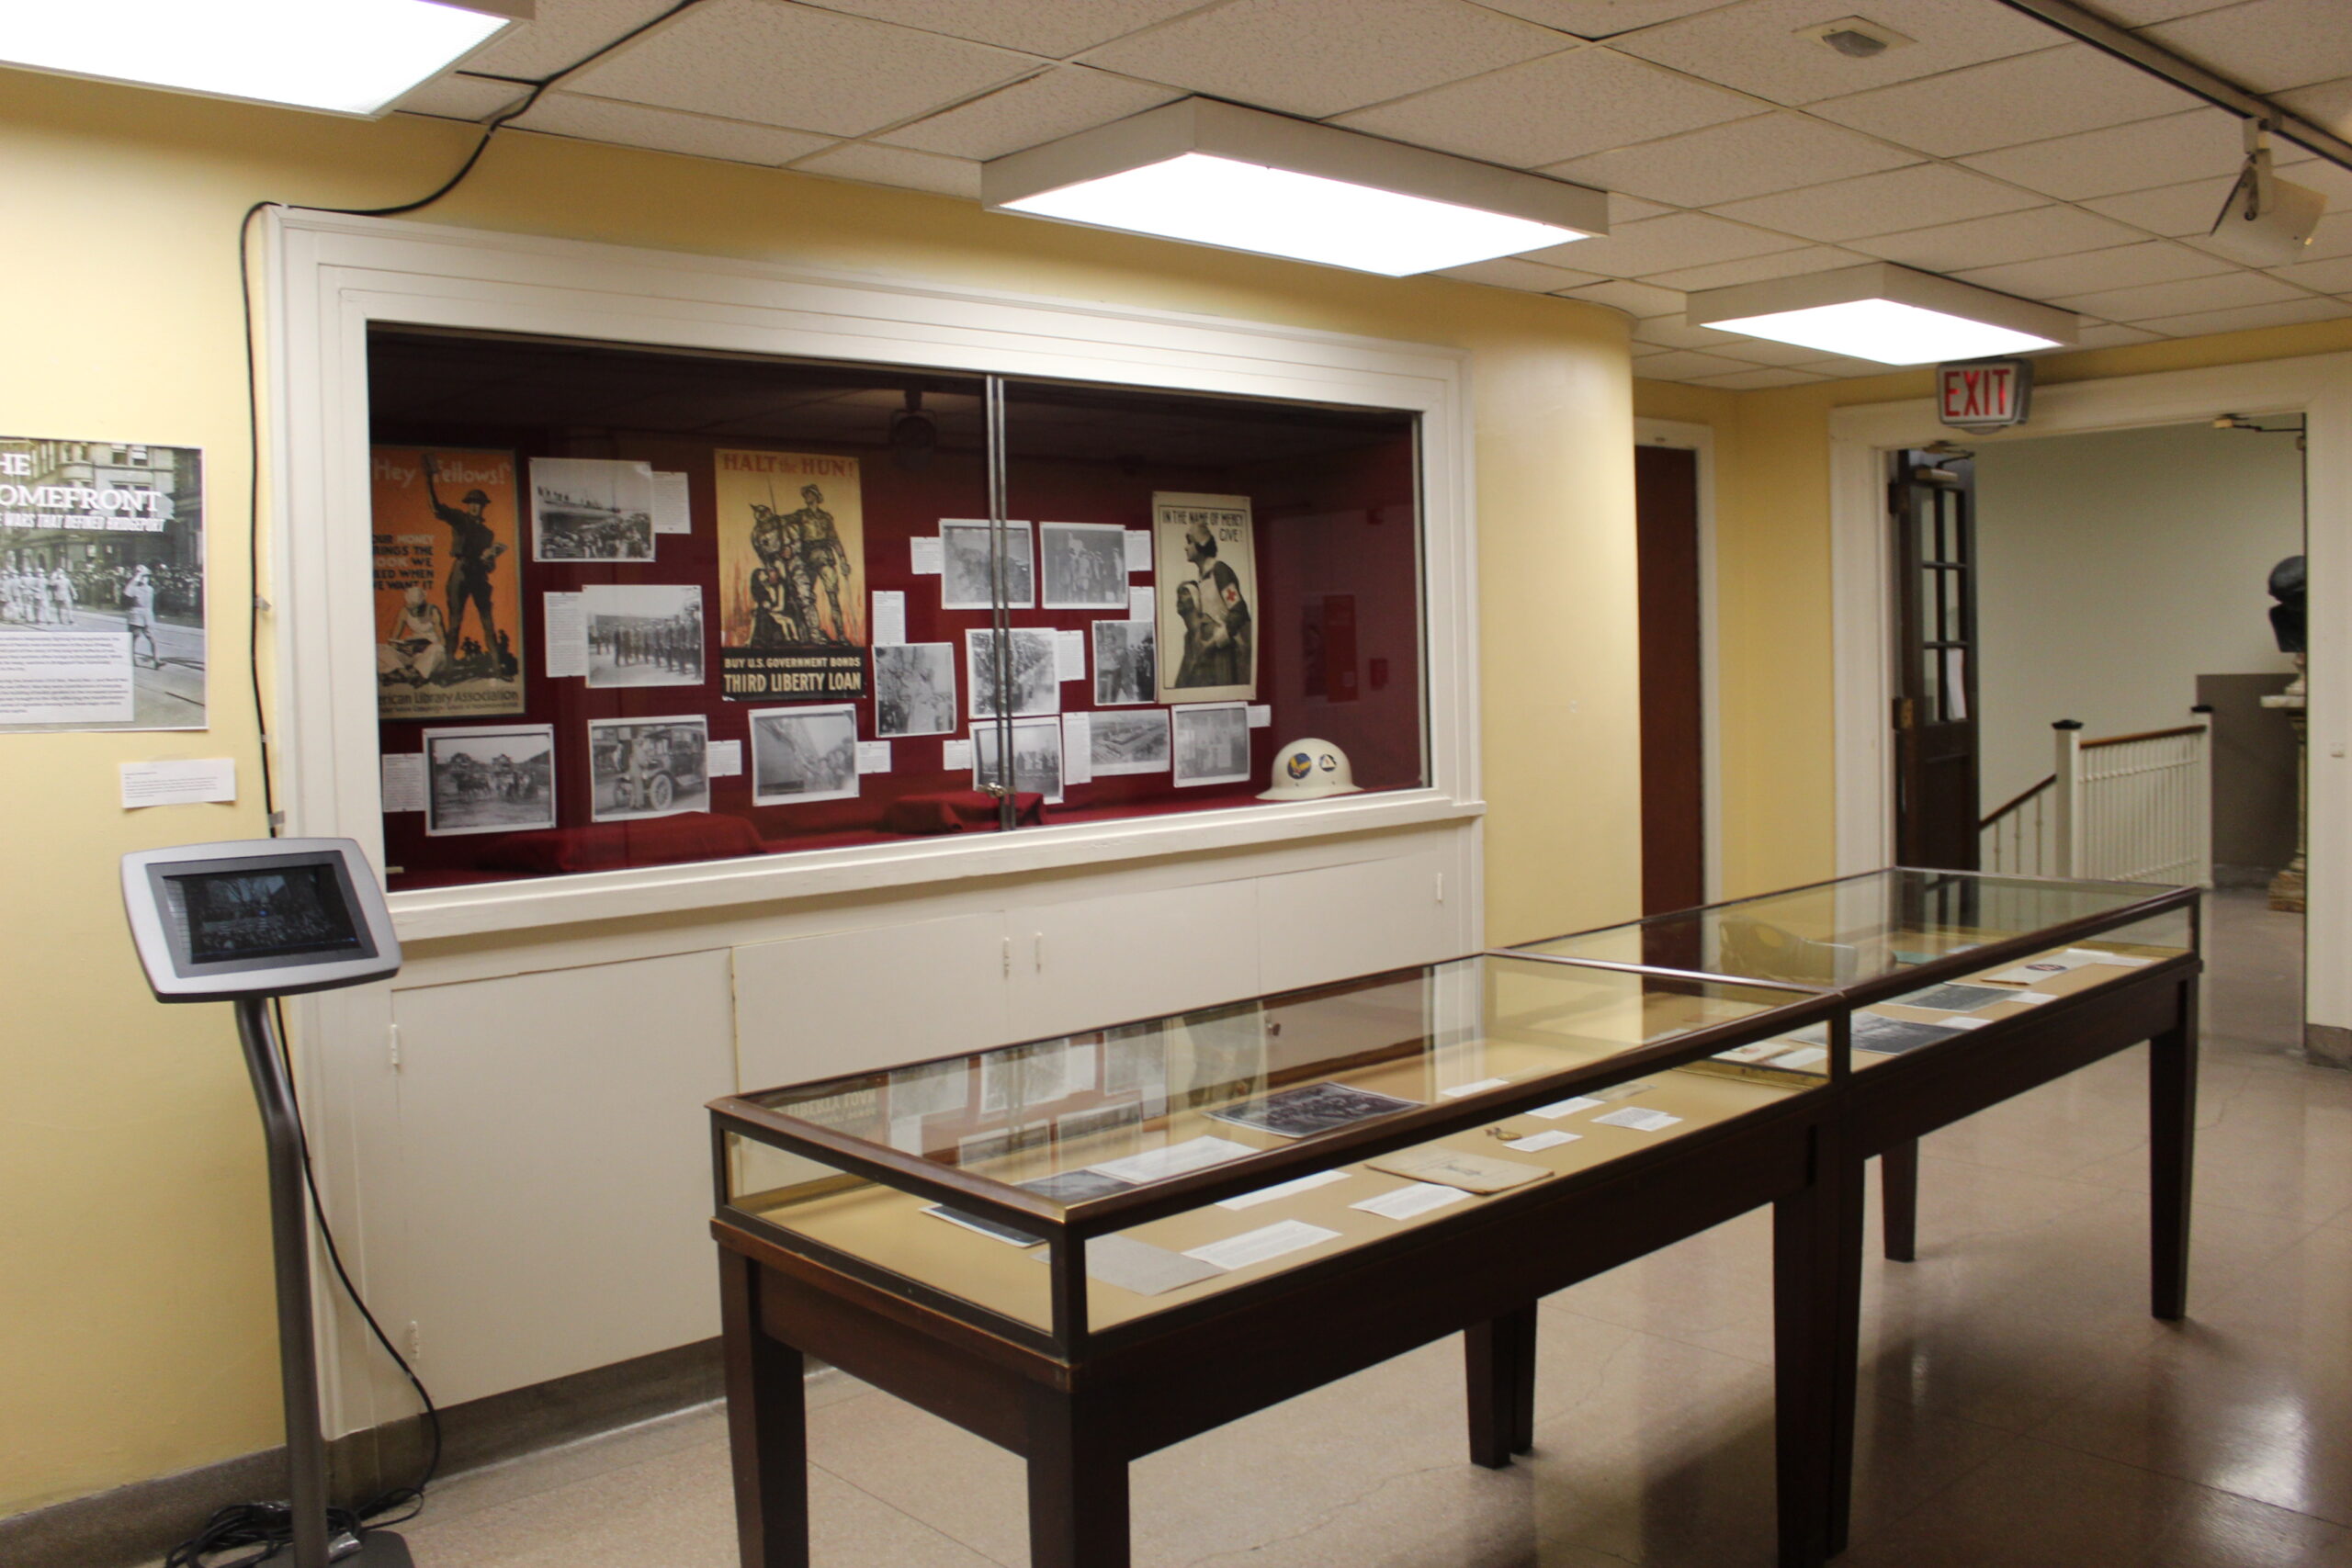 "The Home Front" Exhibit